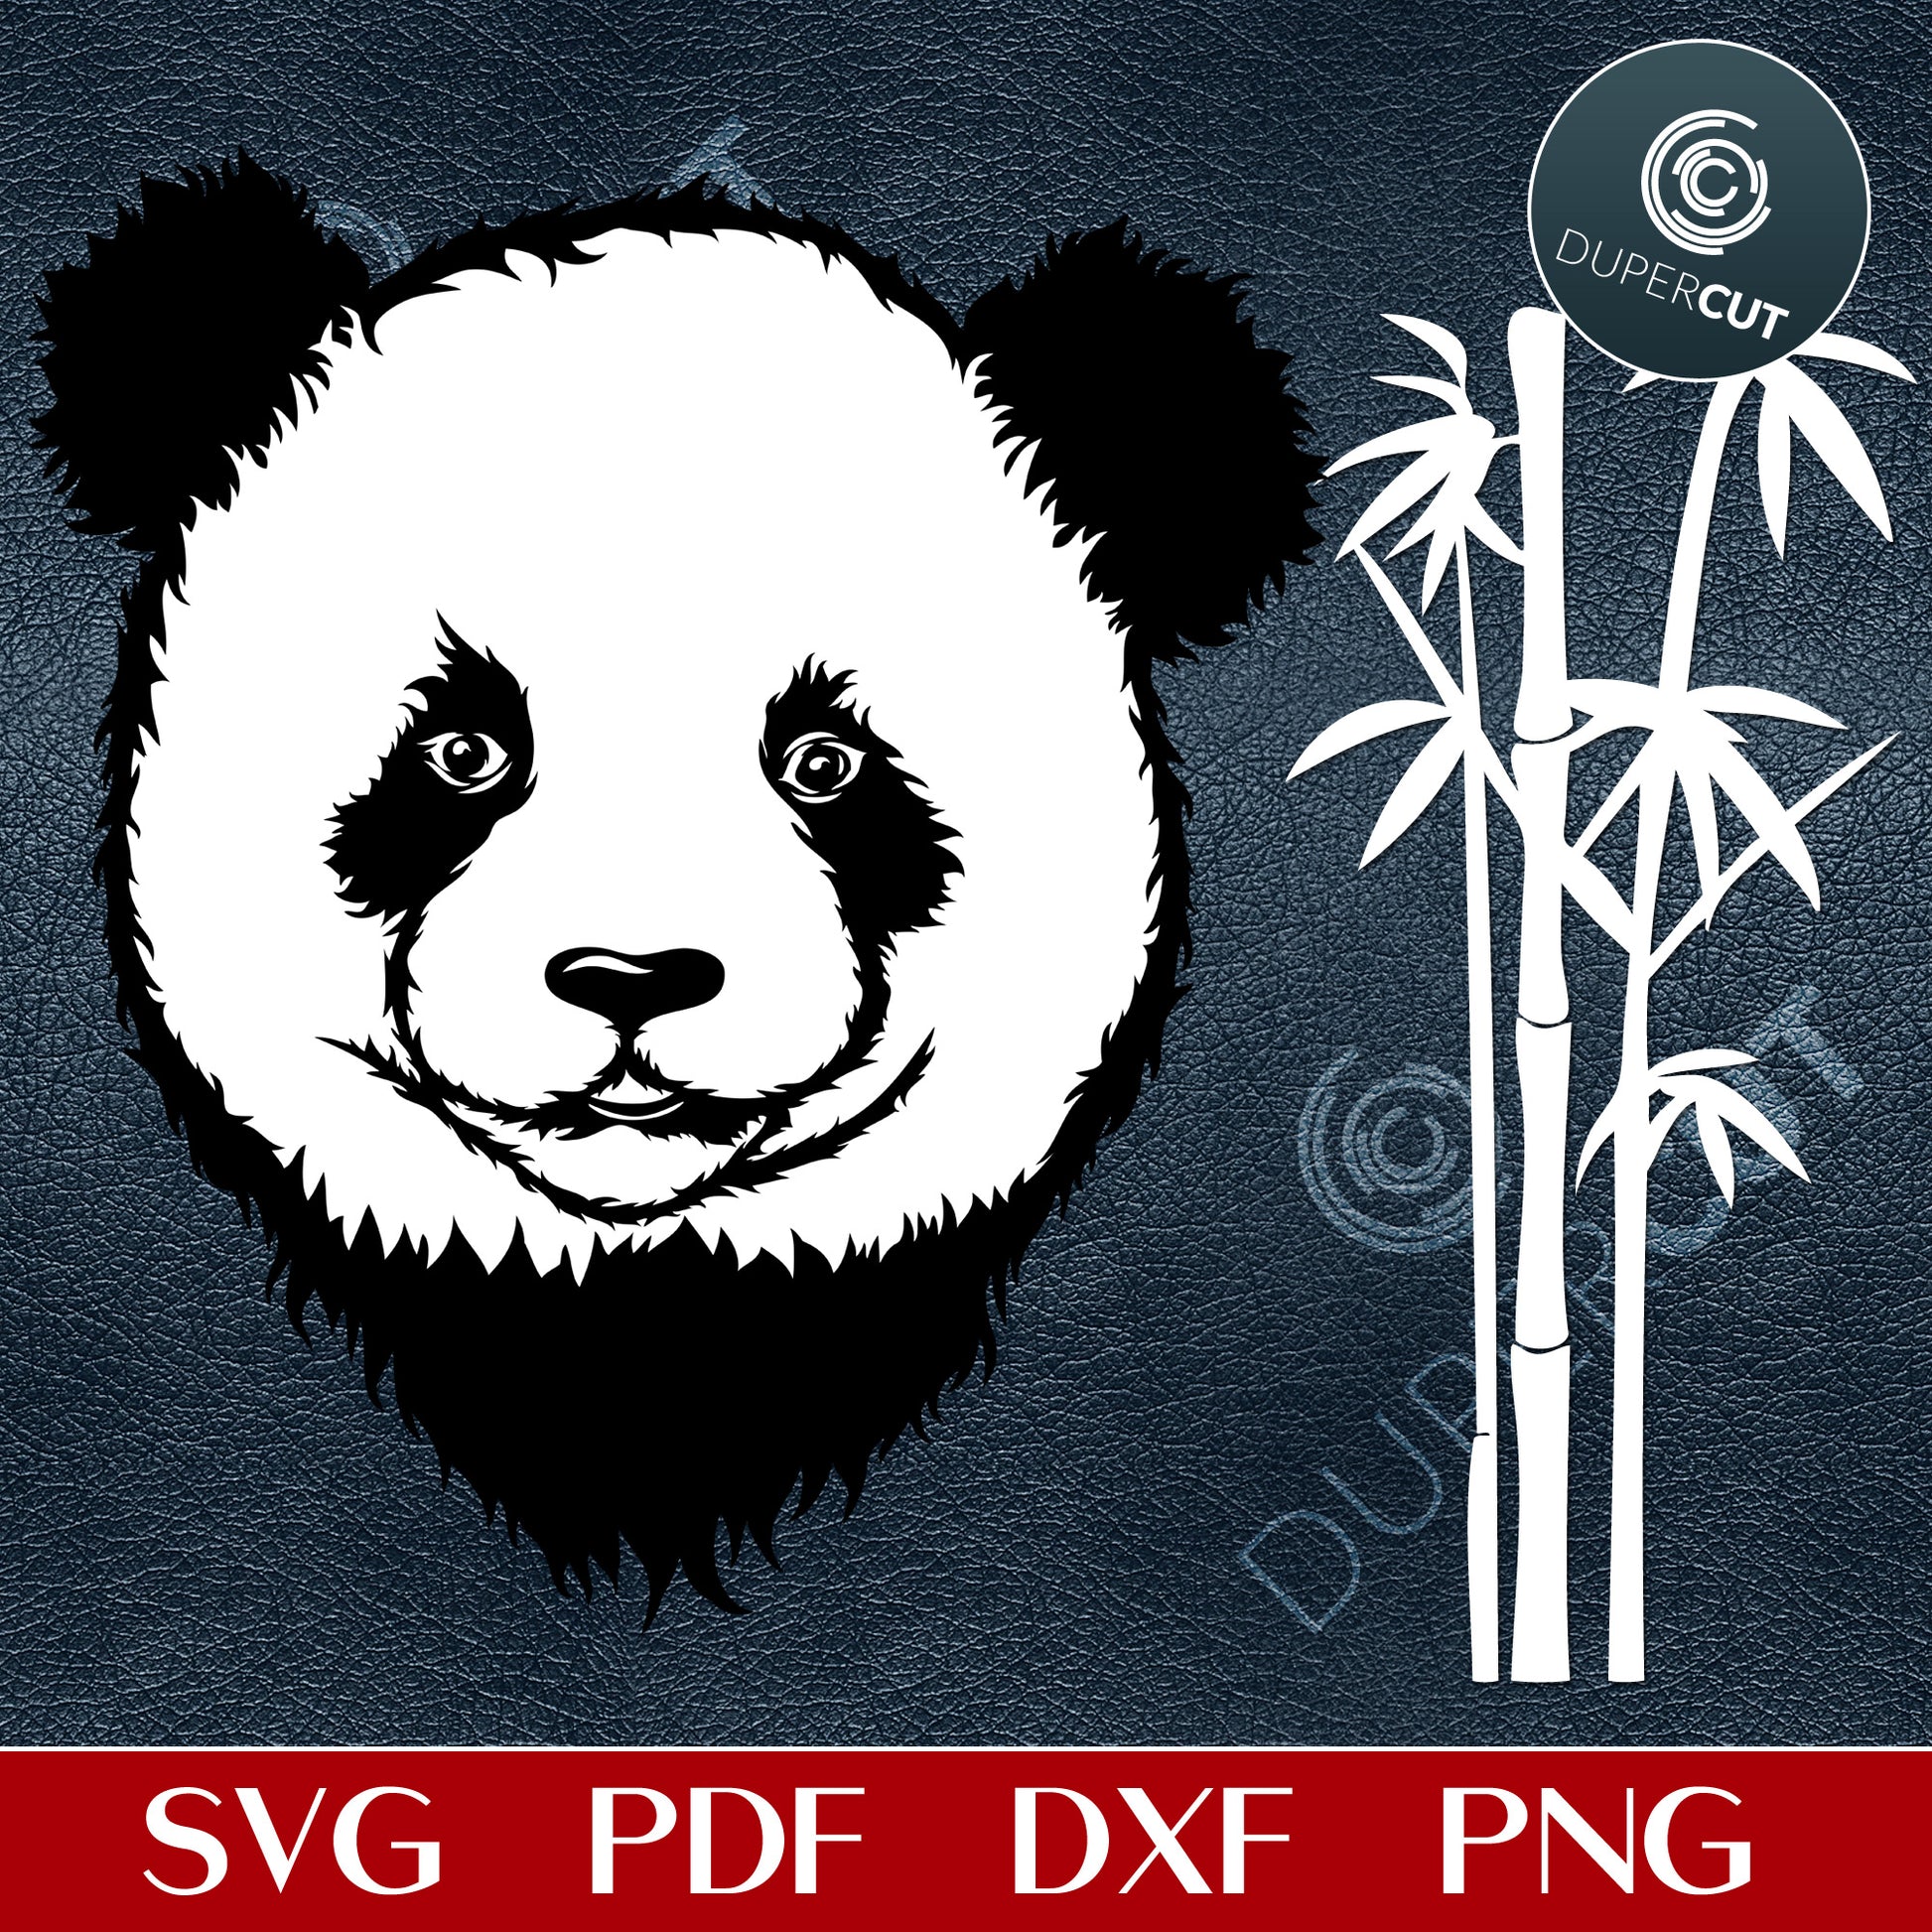 Panda bear with bamboo illustration  - SVG DXF PNG files for CNC machines, laser cutting, Cricut, Silhouette Cameo, Glowforge engraving